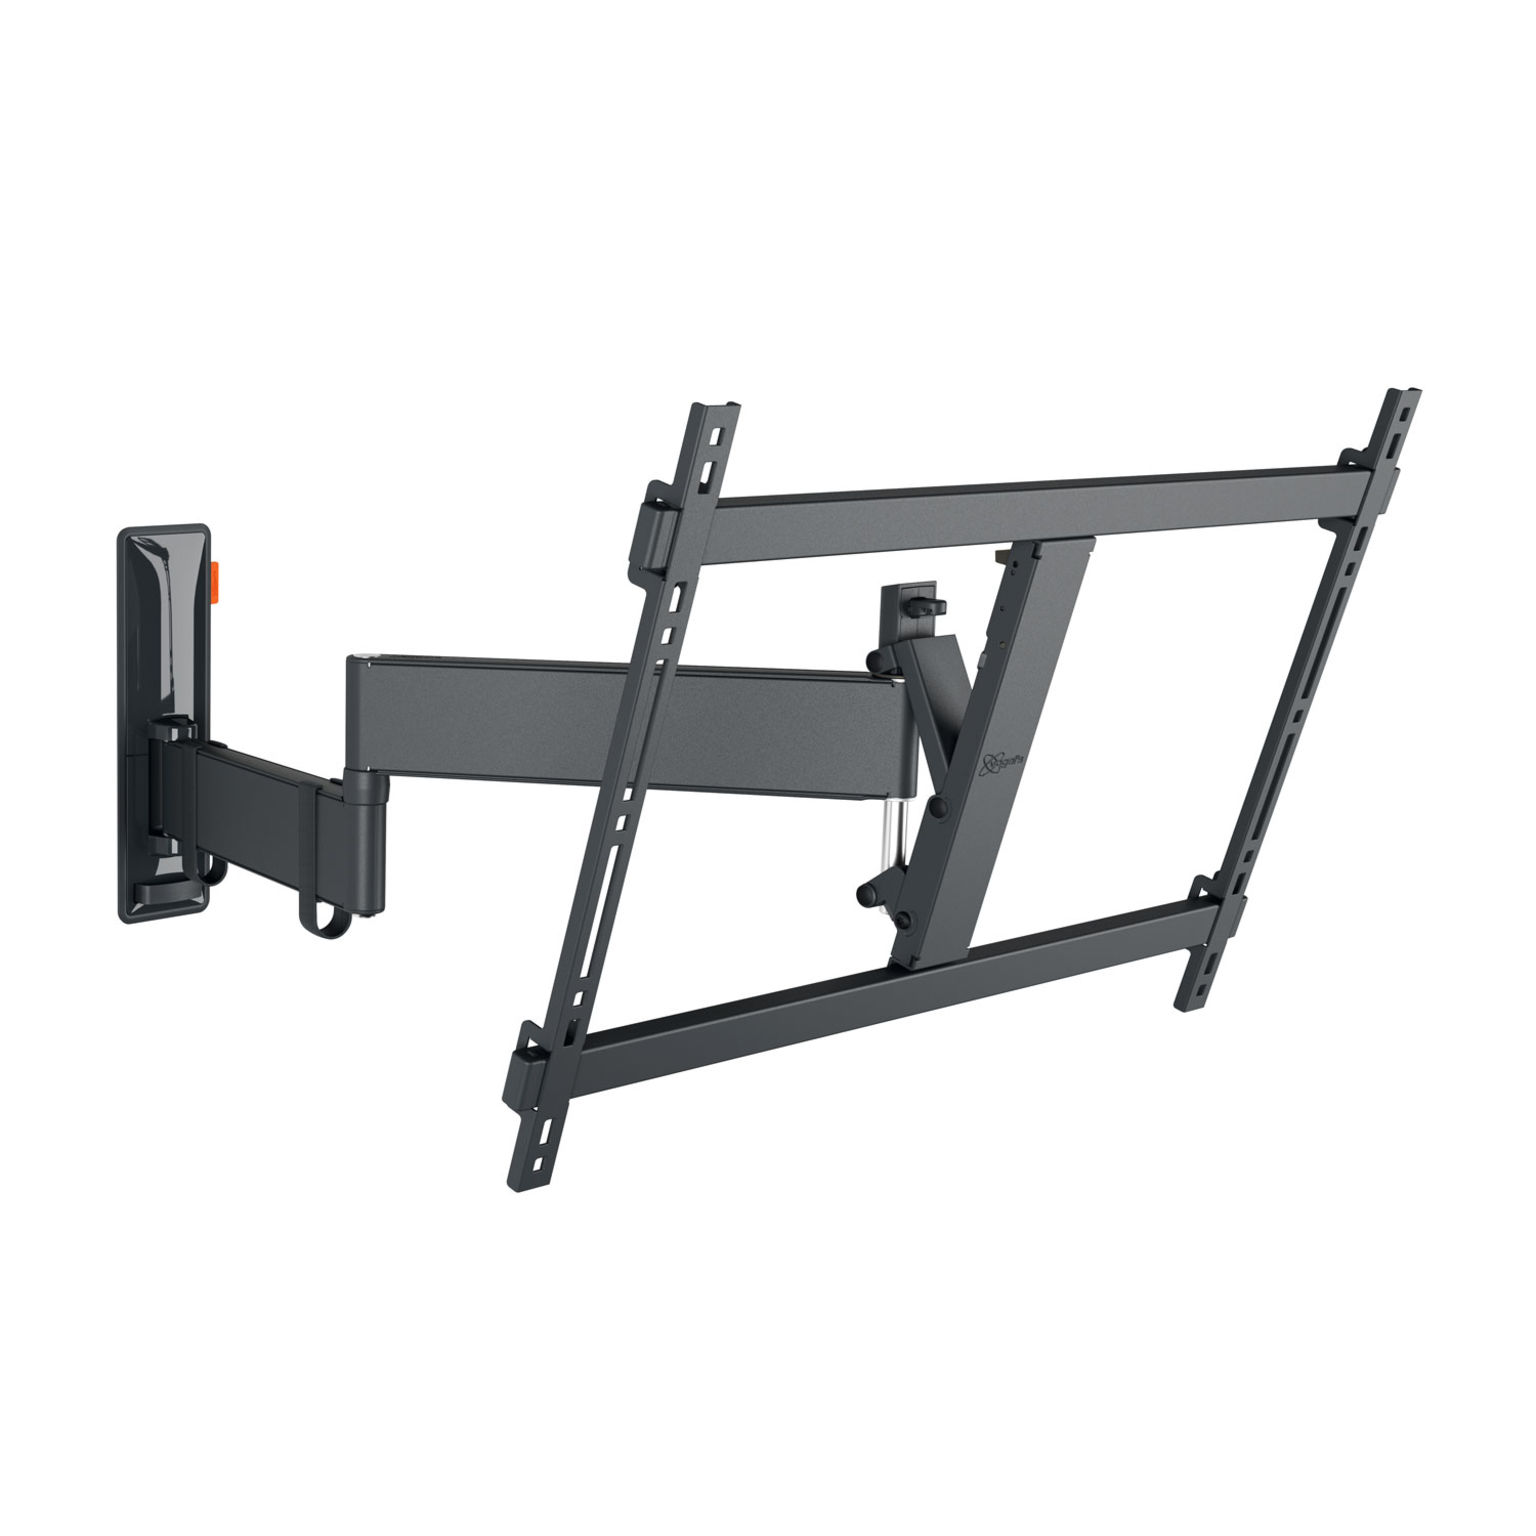 TVM 3645 TV wall mount